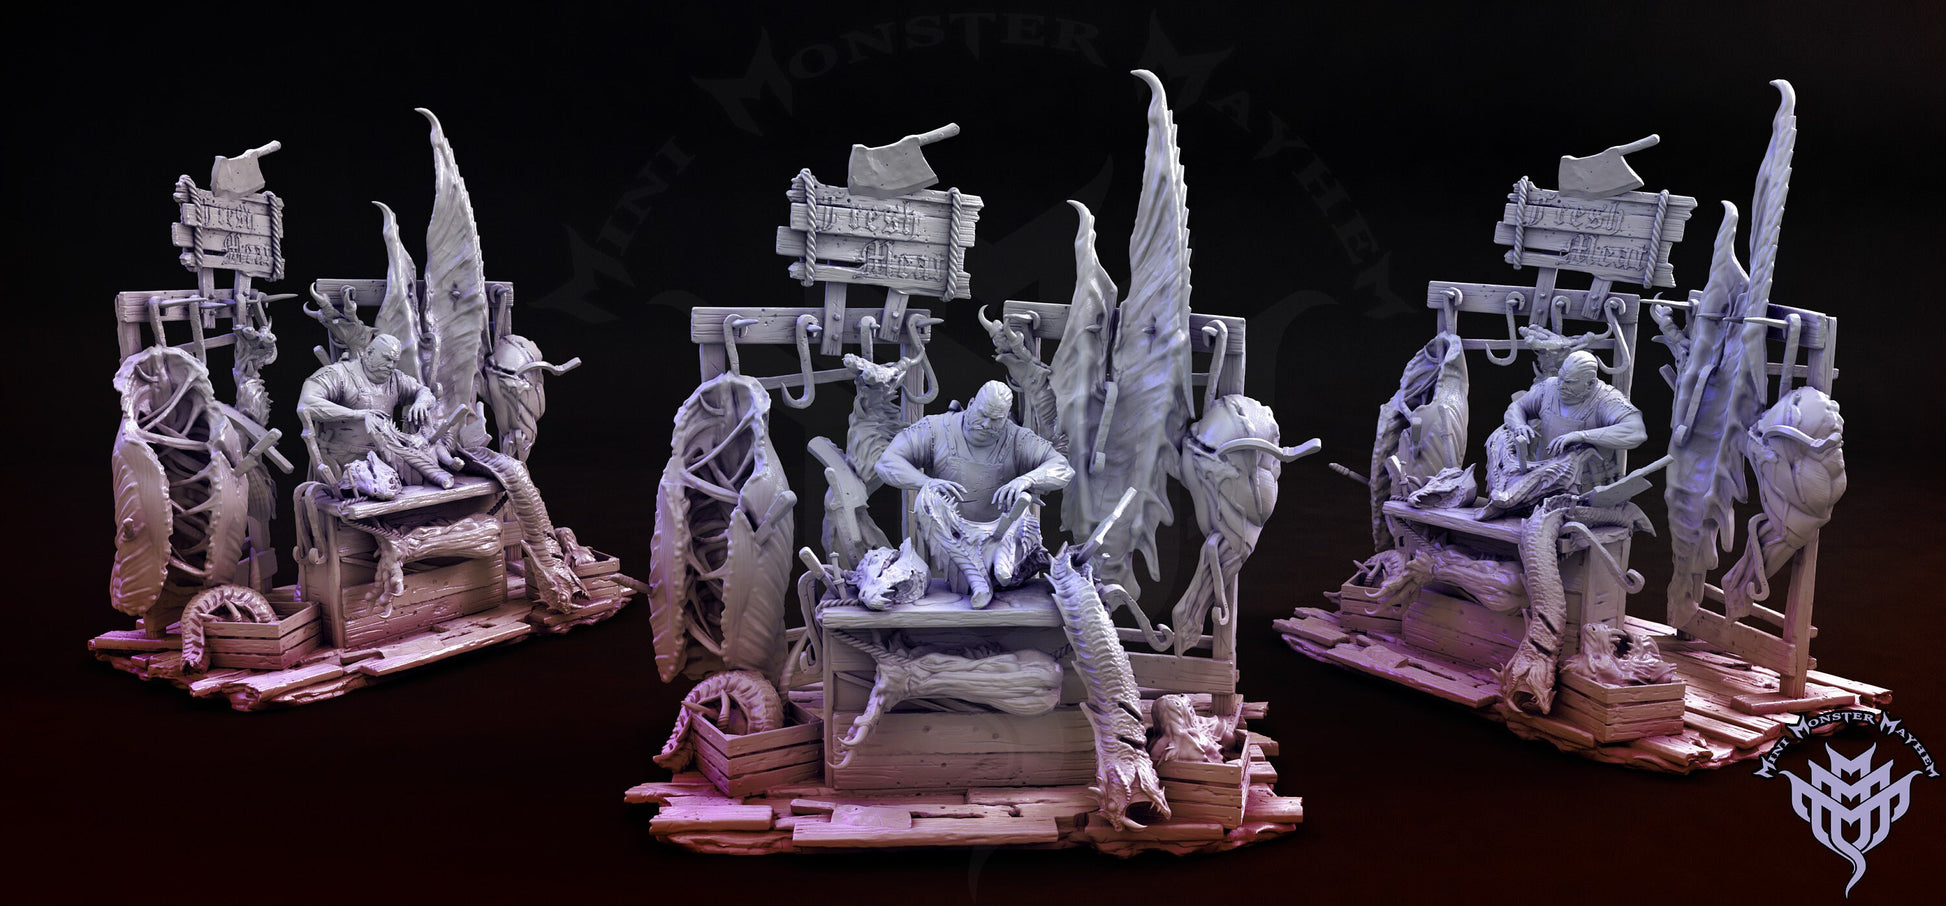 Butcher Stand Character and Terrain - Mini Monster Mayhem Printed Miniature Diarama | Dungeons & Dragons | Pathfinder | Tabletop